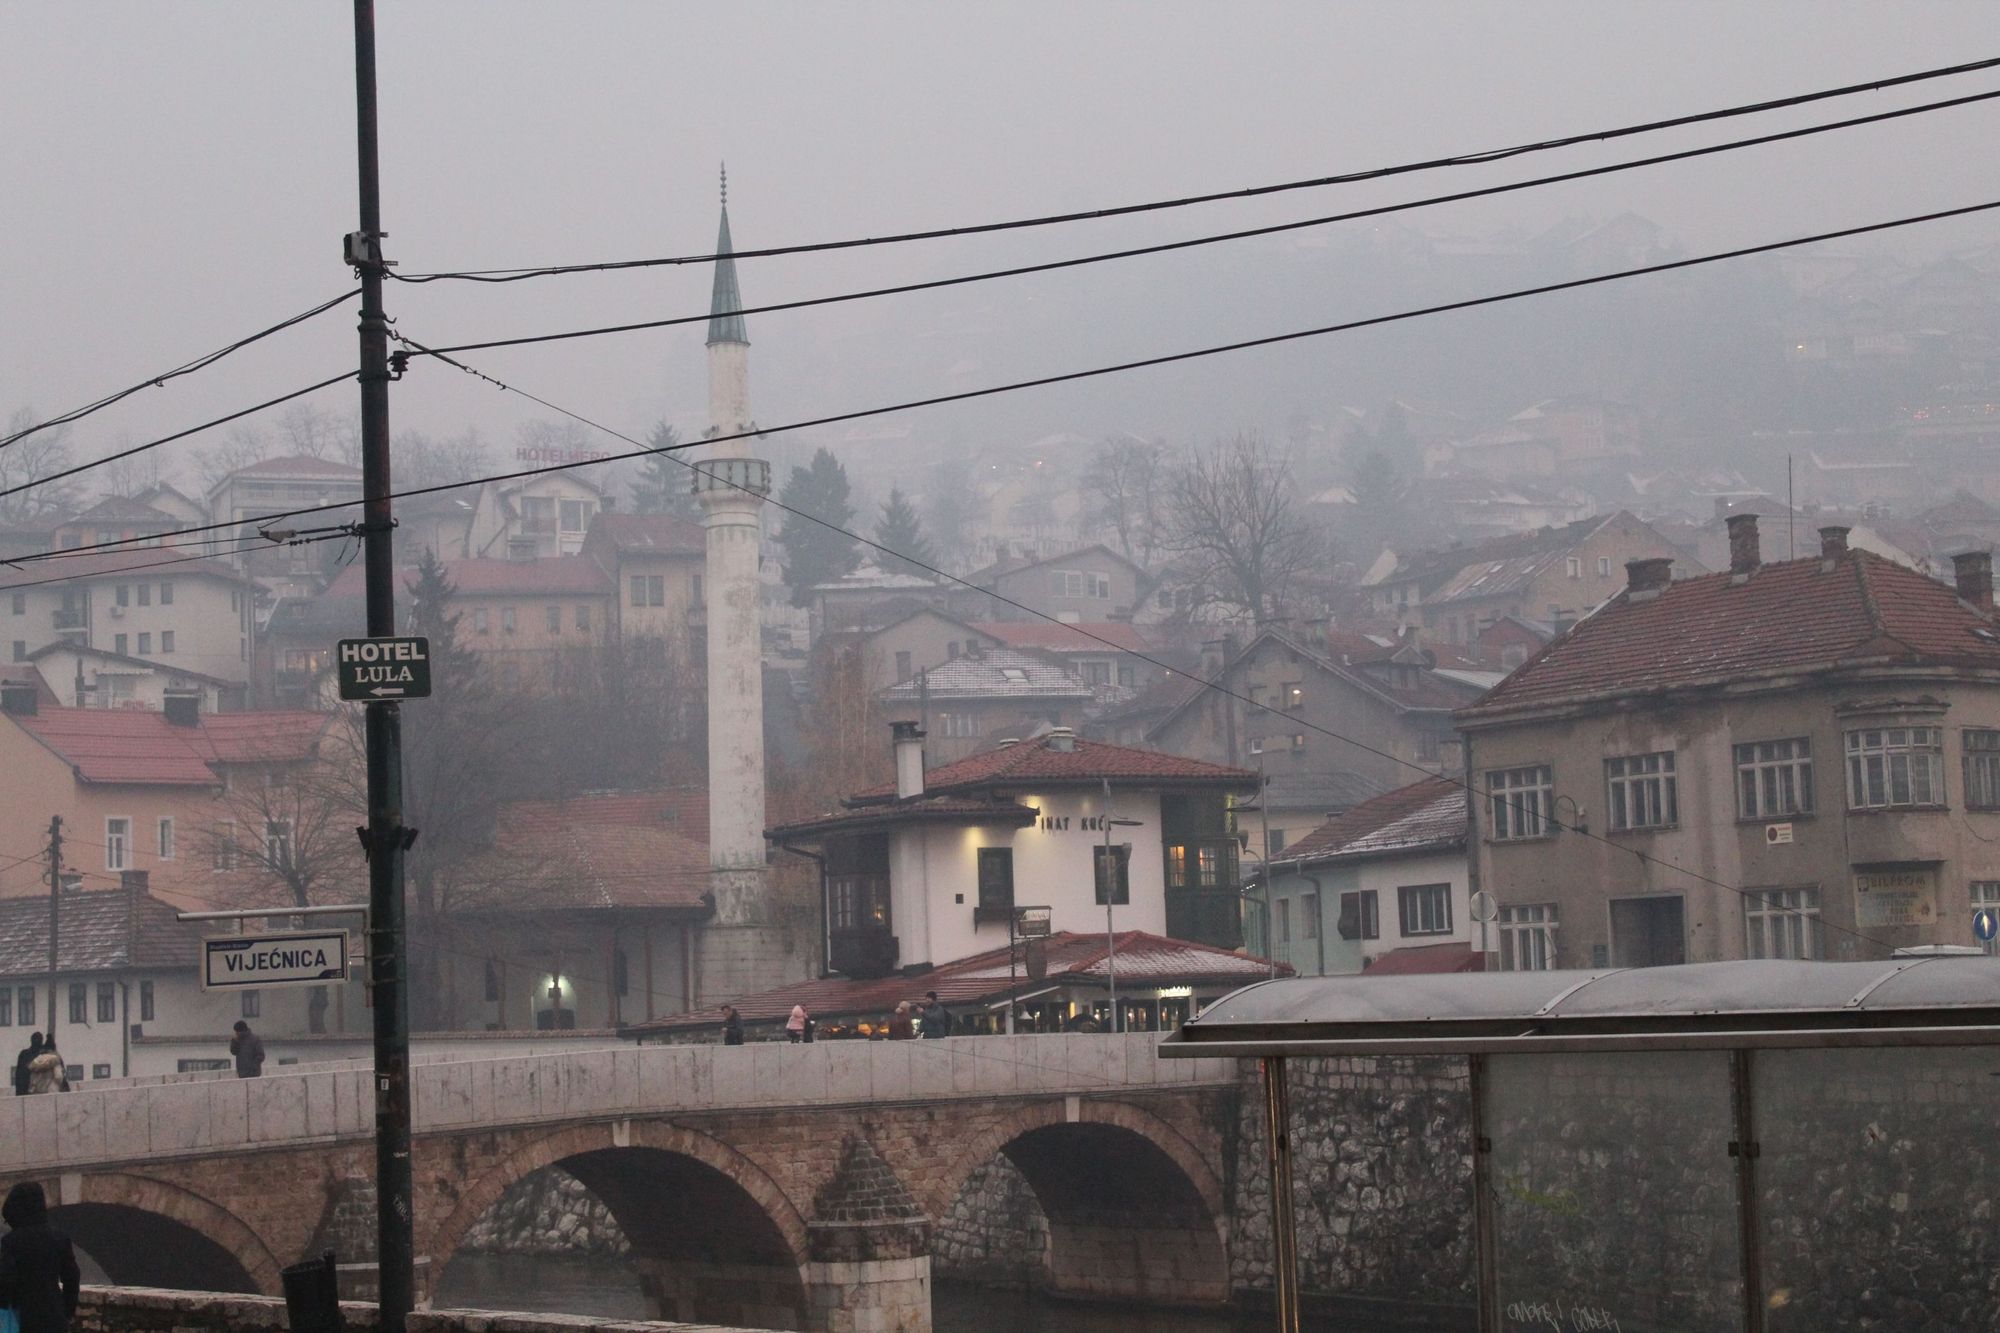 Looking into the old town of Sarajevo, across the Miljacka River and the Latin Bridge.